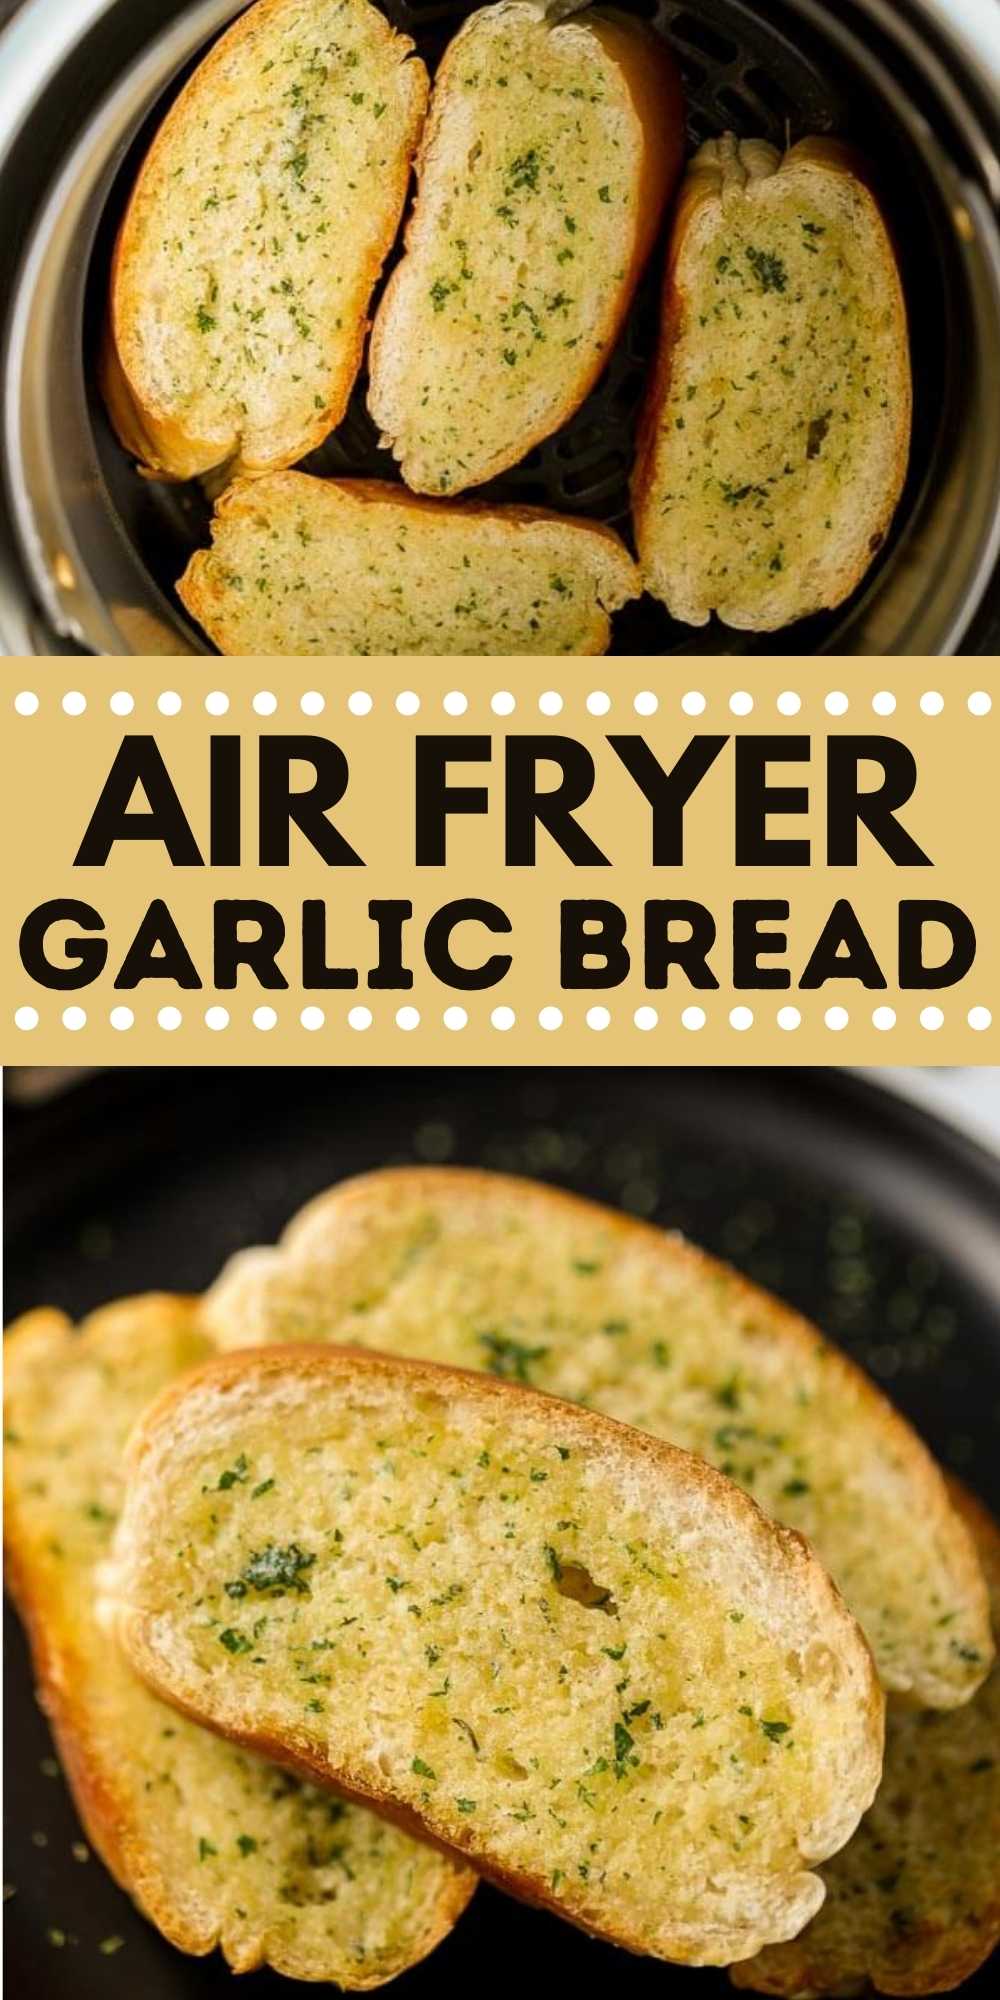 Air Fryer Garlic Bread is the perfect way to make garlic bread. It is ready in less than 5 minutes you will have the best crispy garlic bread. This homemade garlic bread is easy to make in an air fryer and everyone loves it.  #eatingonadime #airfryerrecipes #garlicbread #breadrecipes 
